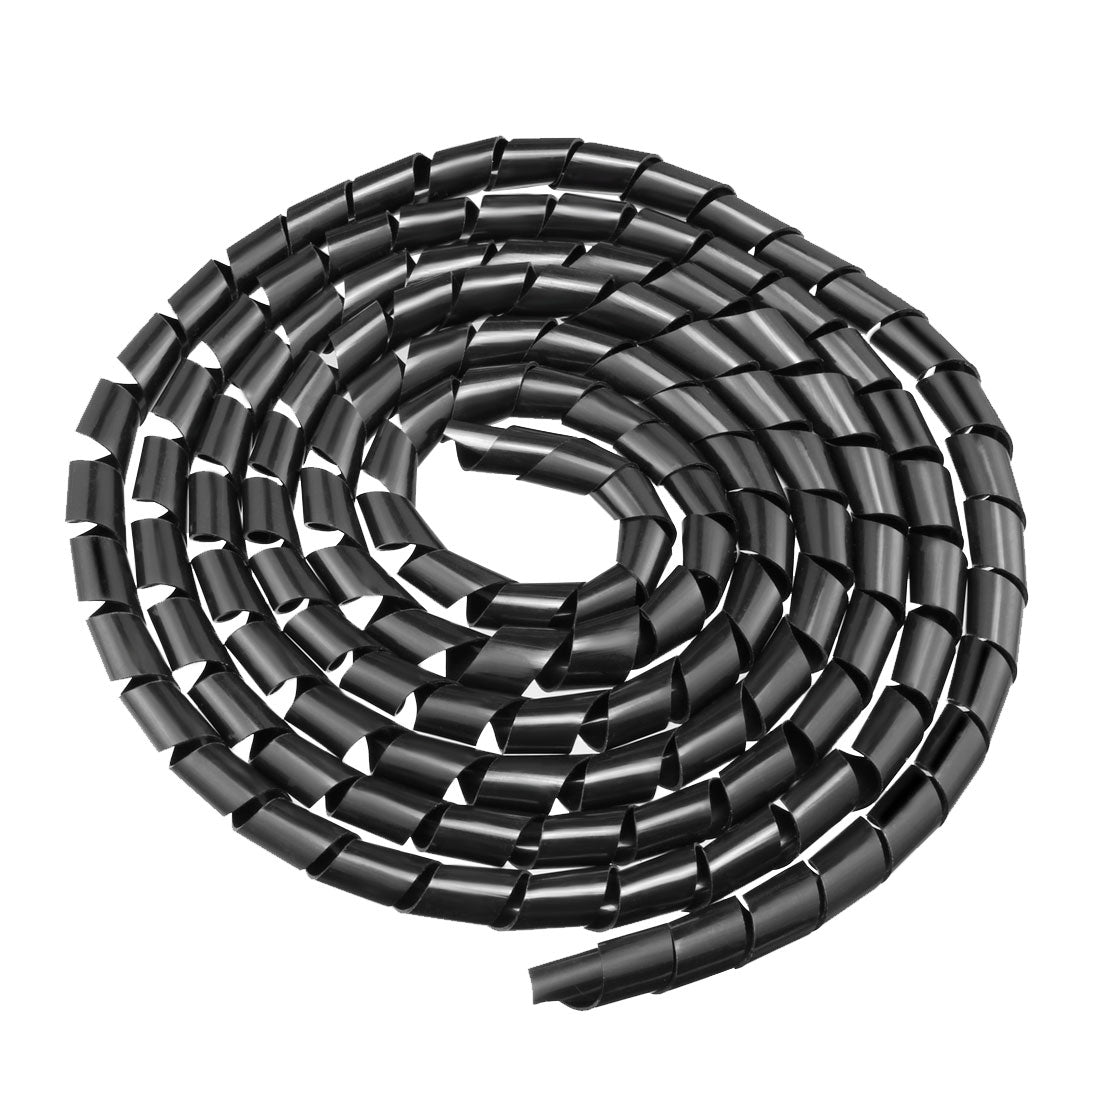 uxcell Uxcell 18mm Flexible Spiral Tube Cable Wire Wrap Computer Manage Cord Black 3.5-4M